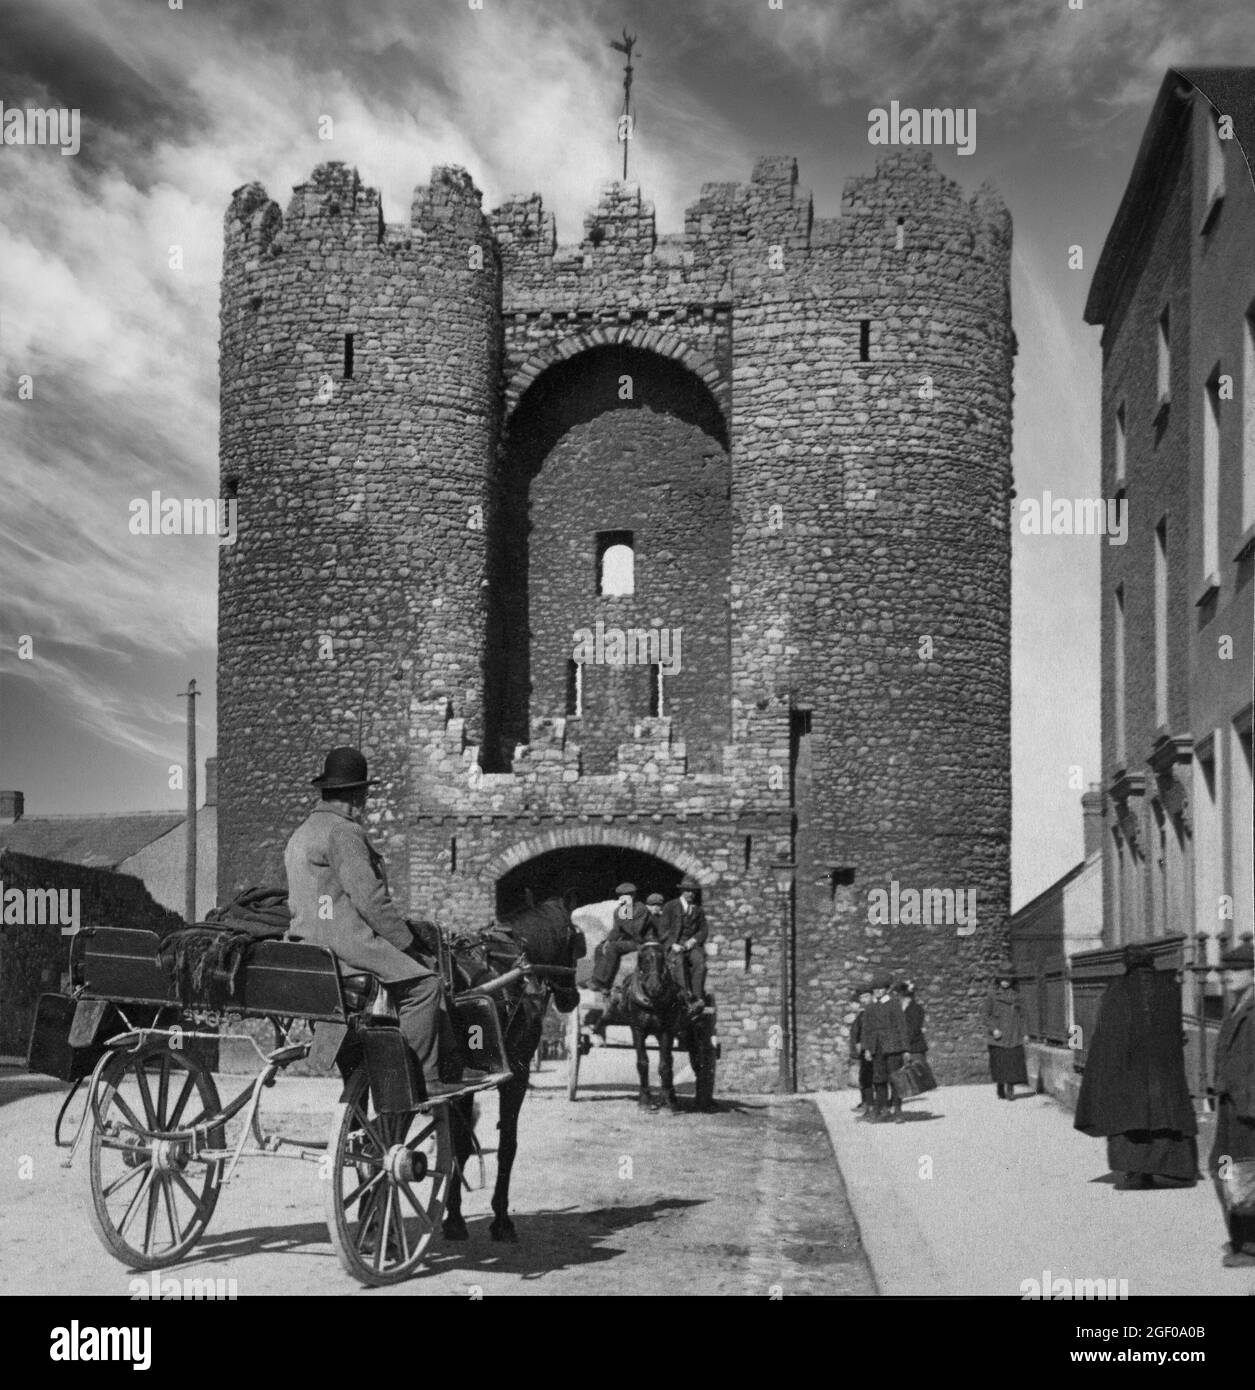 An early 20th century view of Saint Laurence's Gate, a barbican built in the 13th century as part of the walled fortifications of the medieval town of Drogheda on the border of counties Meath and Louth in Ireland. Stock Photo